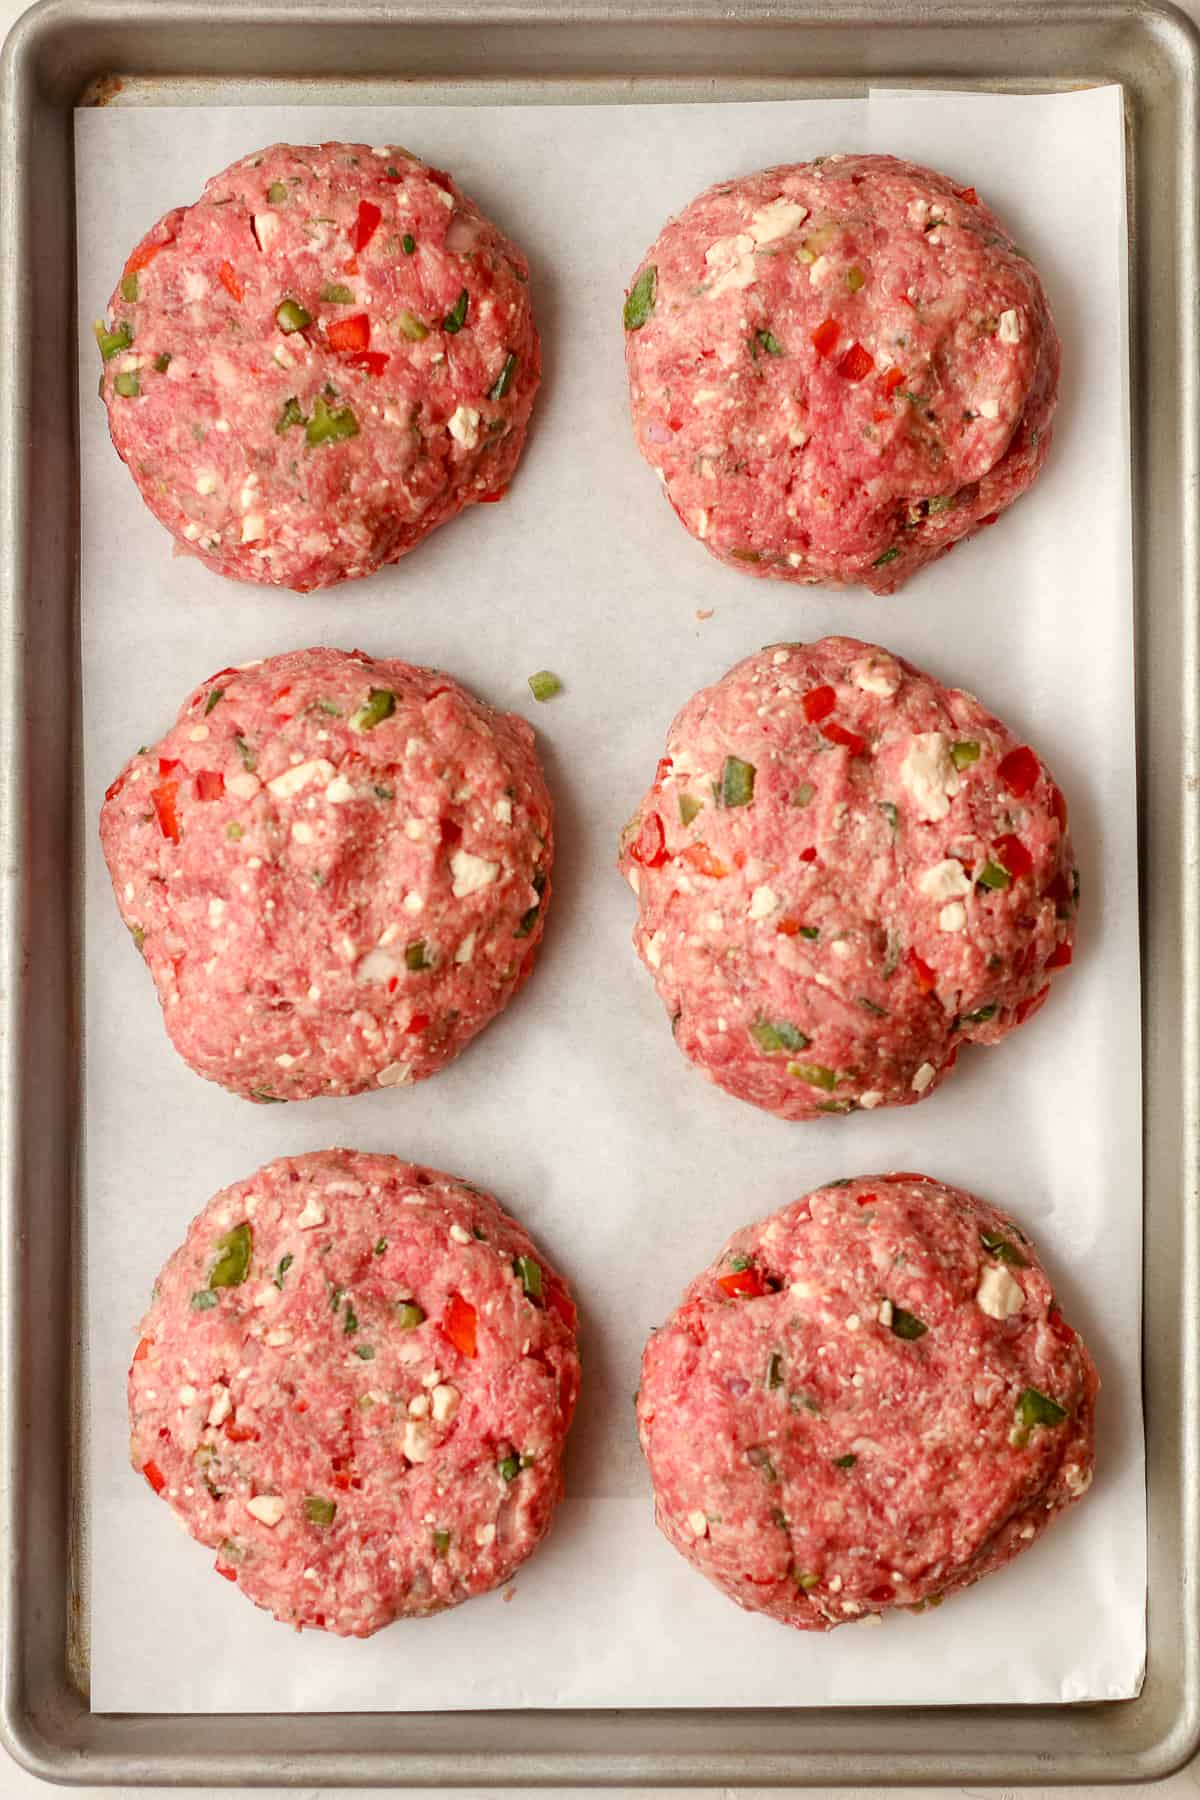 Six burger patties ready to grill.